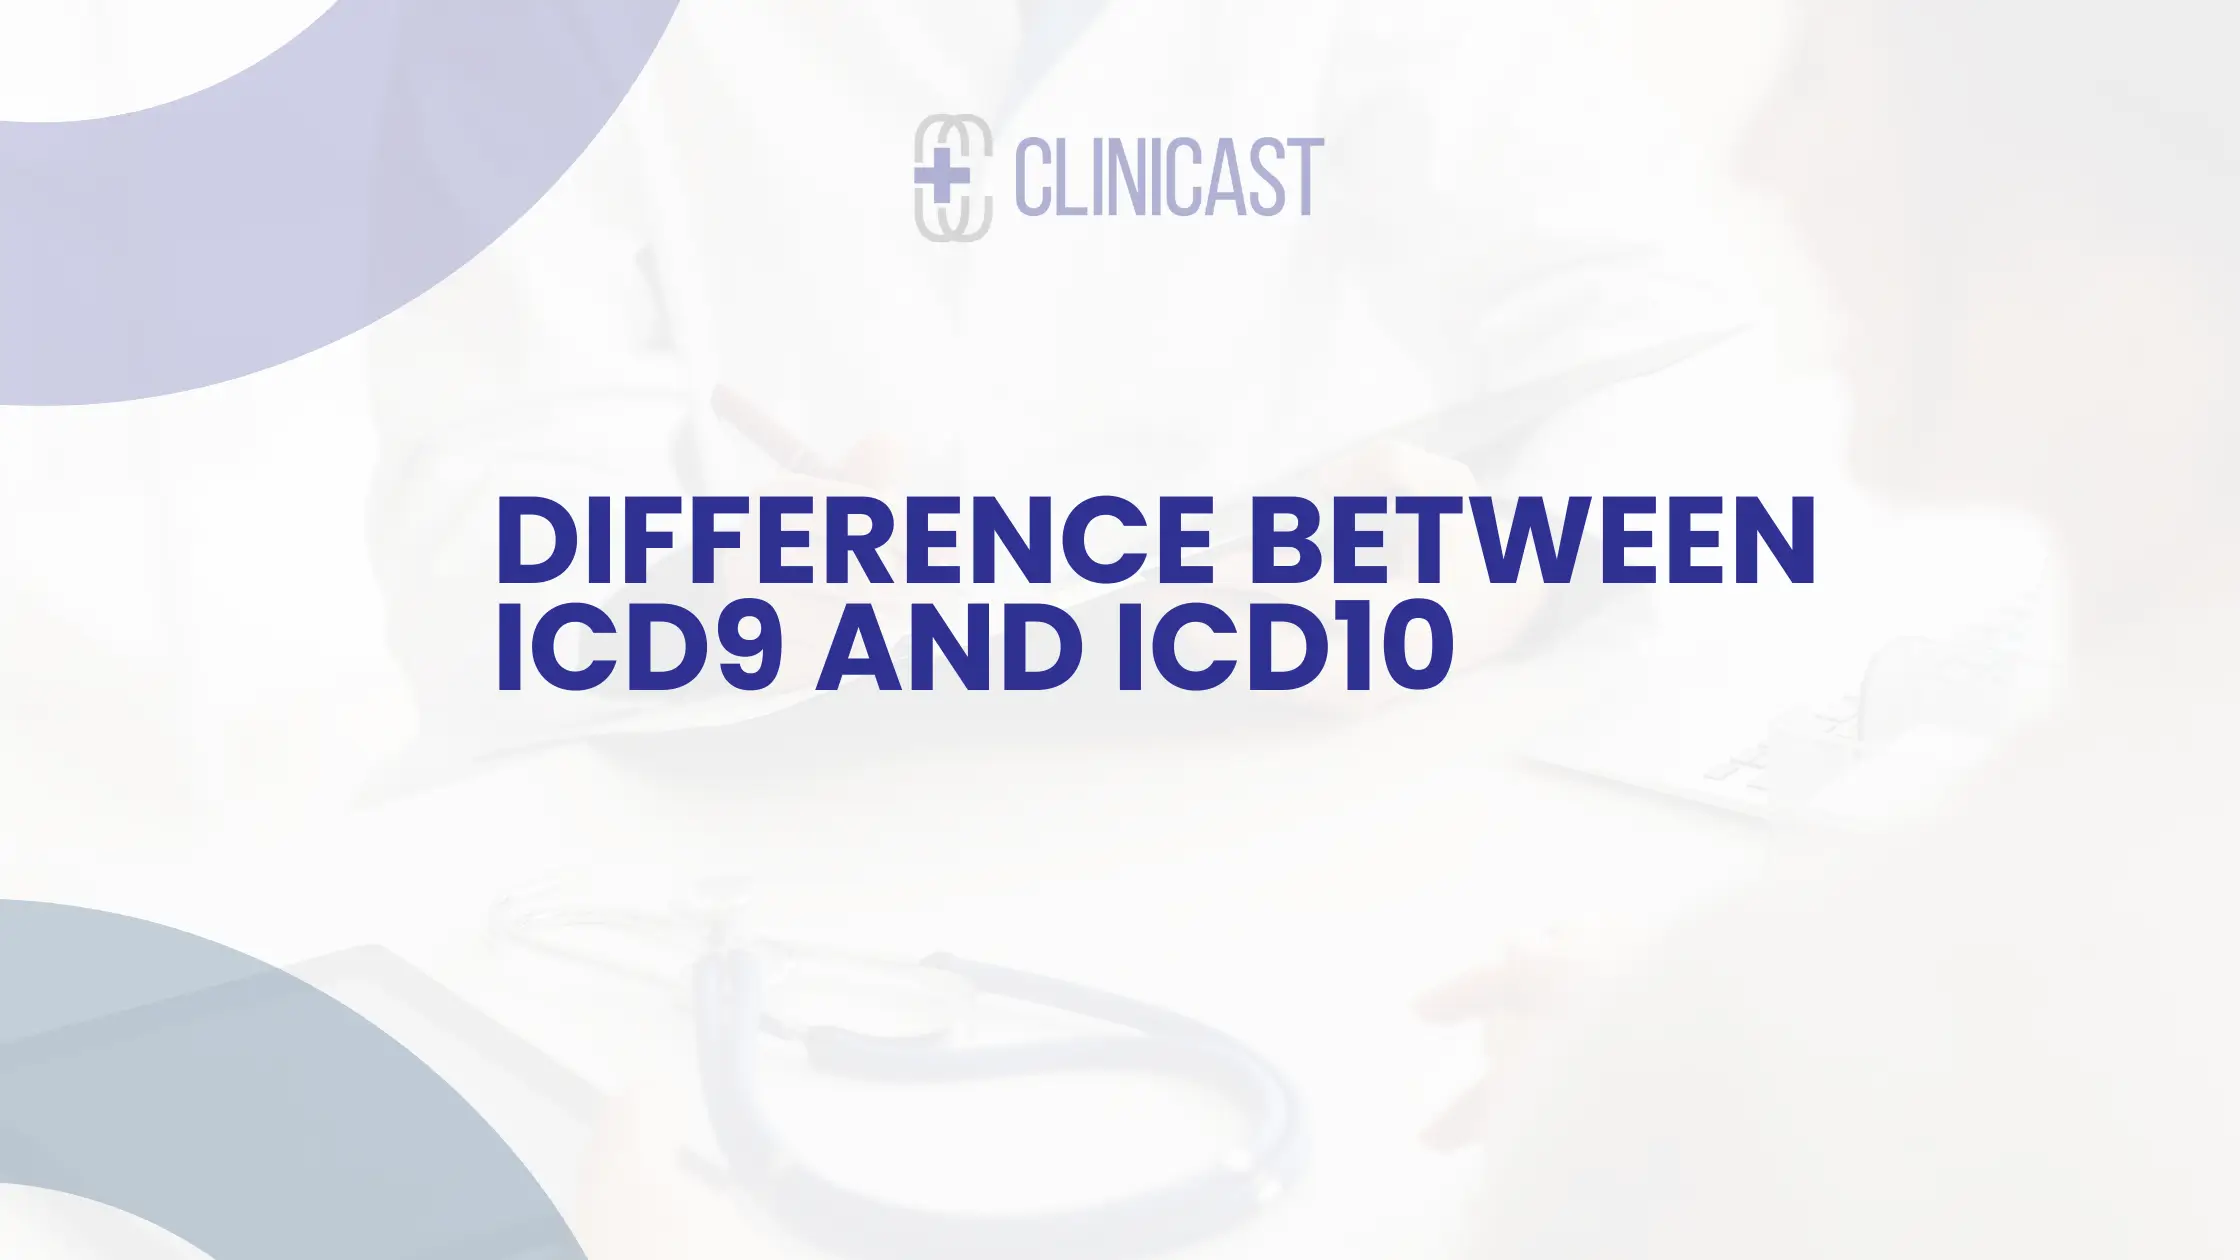 Difference Between ICD9 and ICD10